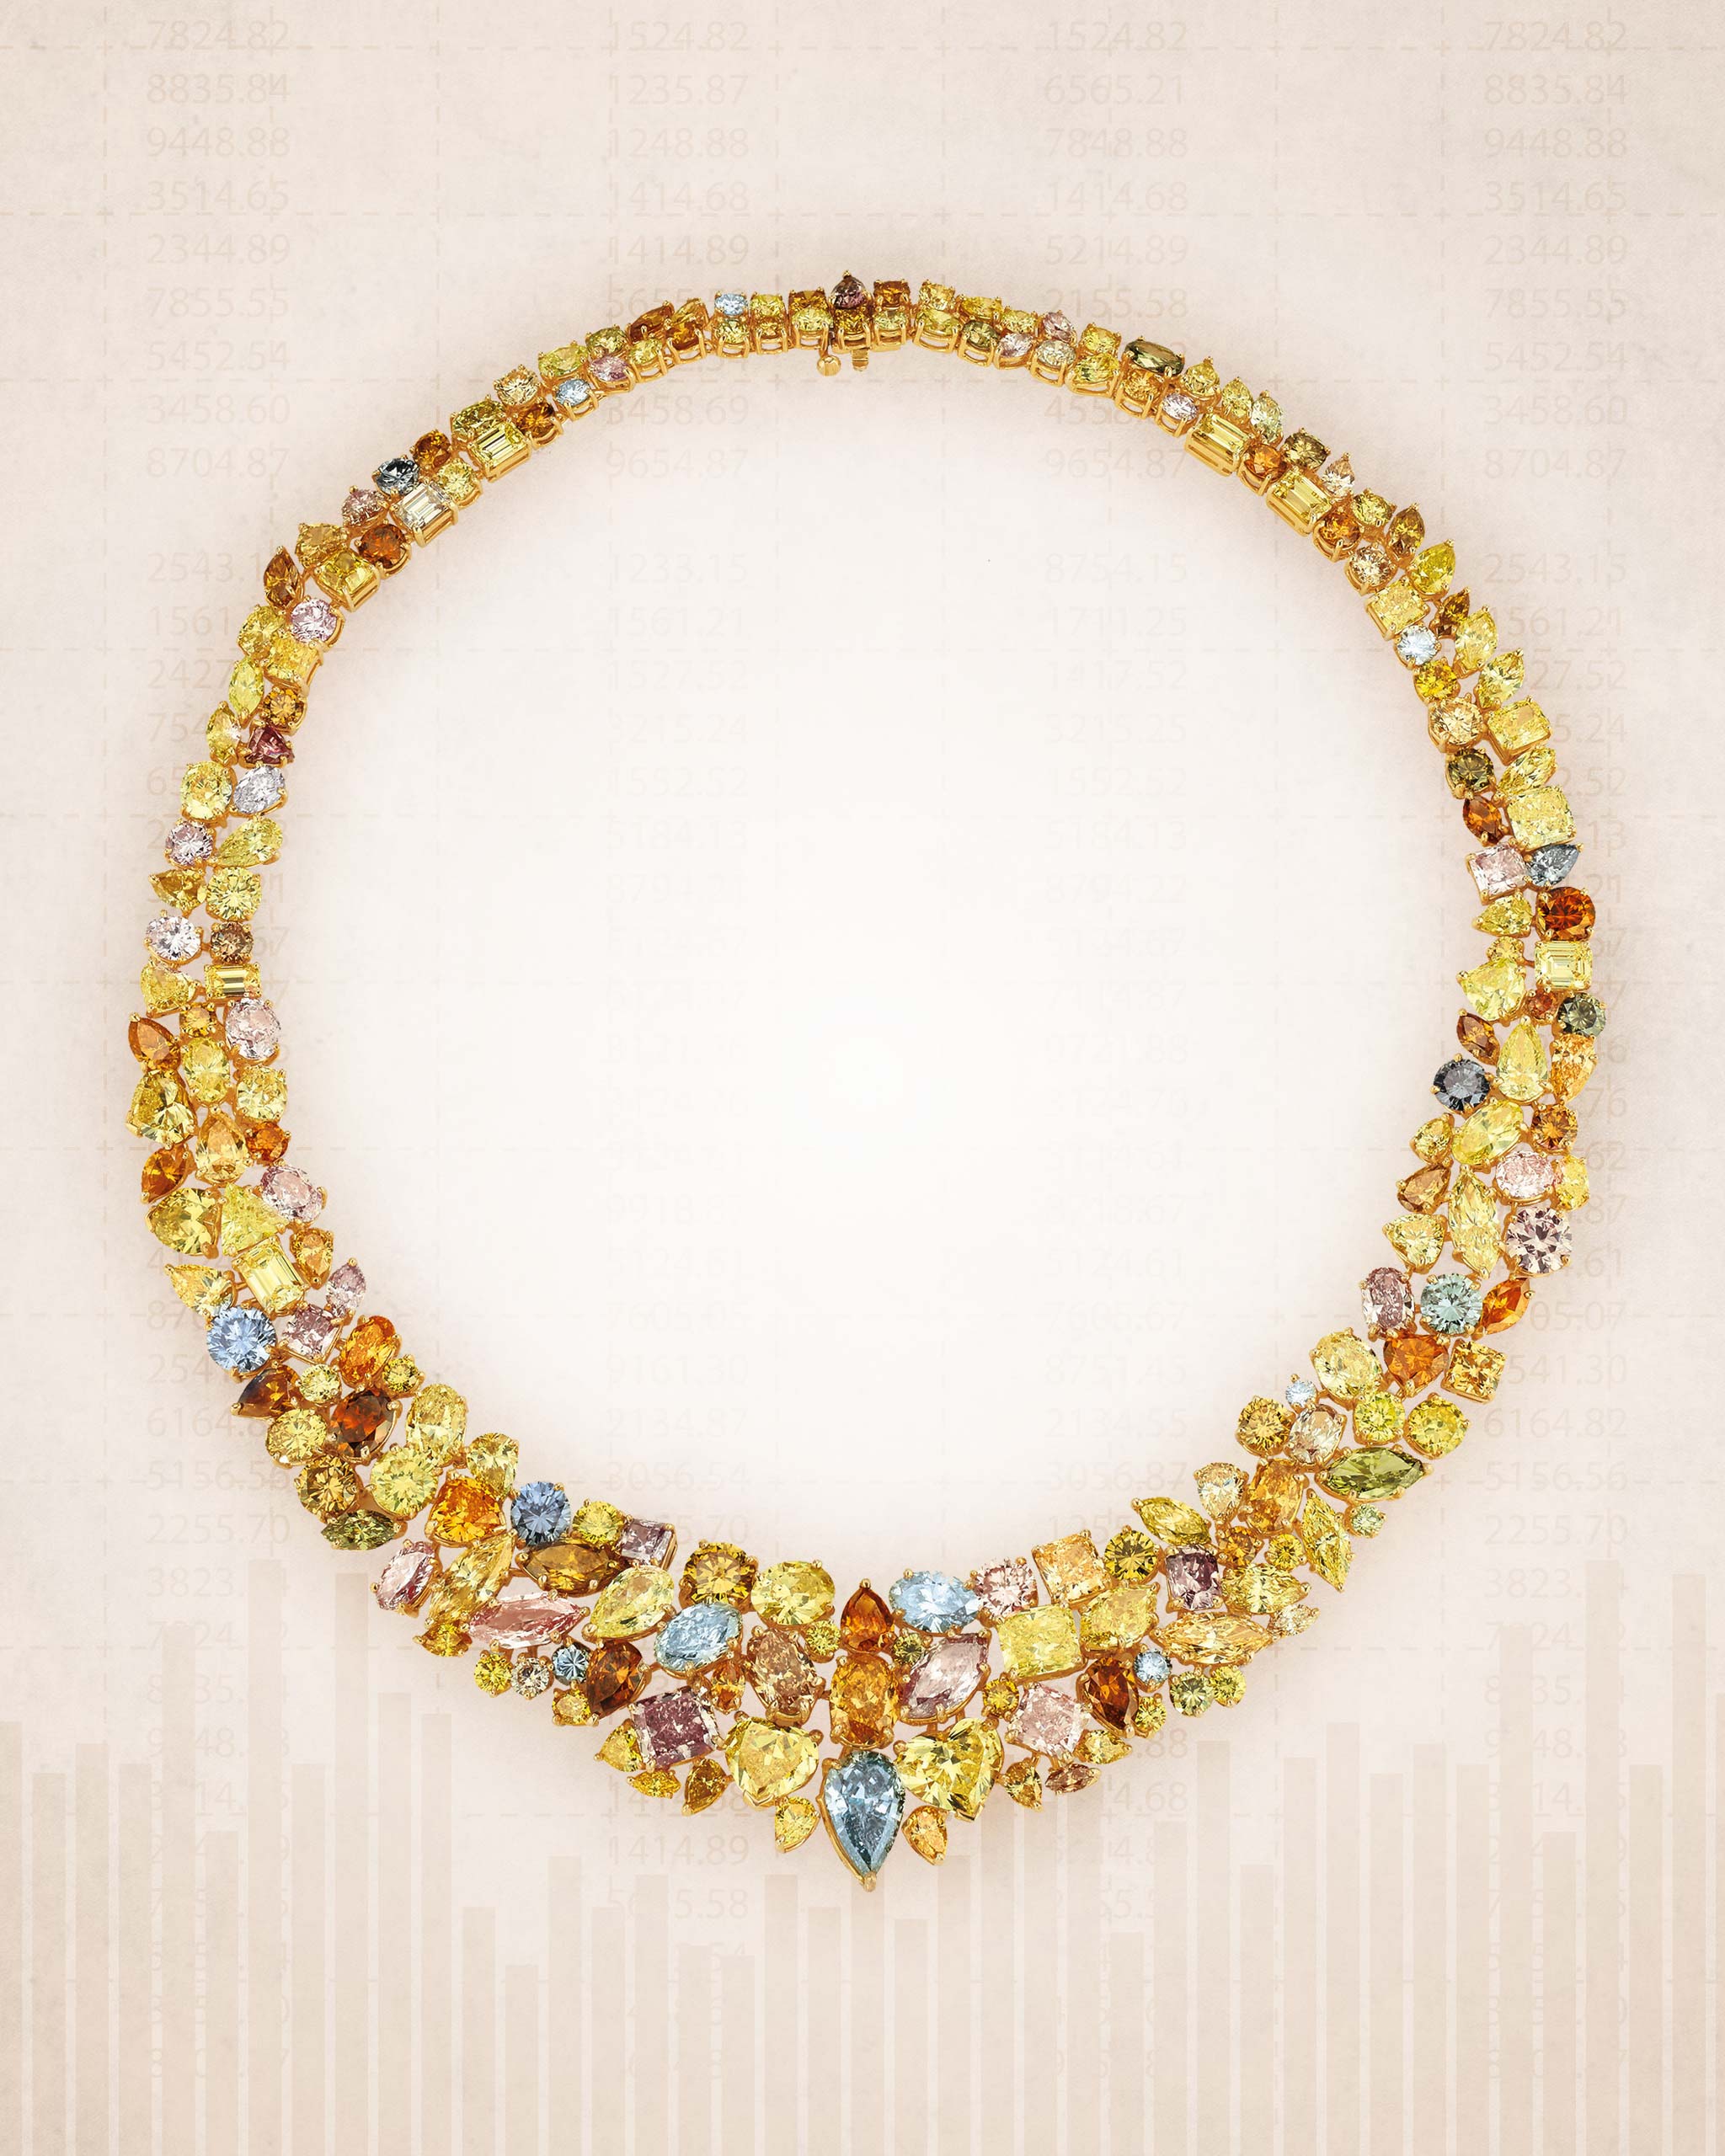 Multi-colored diamond necklace with yellow diamonds, blue diamonds, and pink diamonds sold at the 2020 Phillips auction